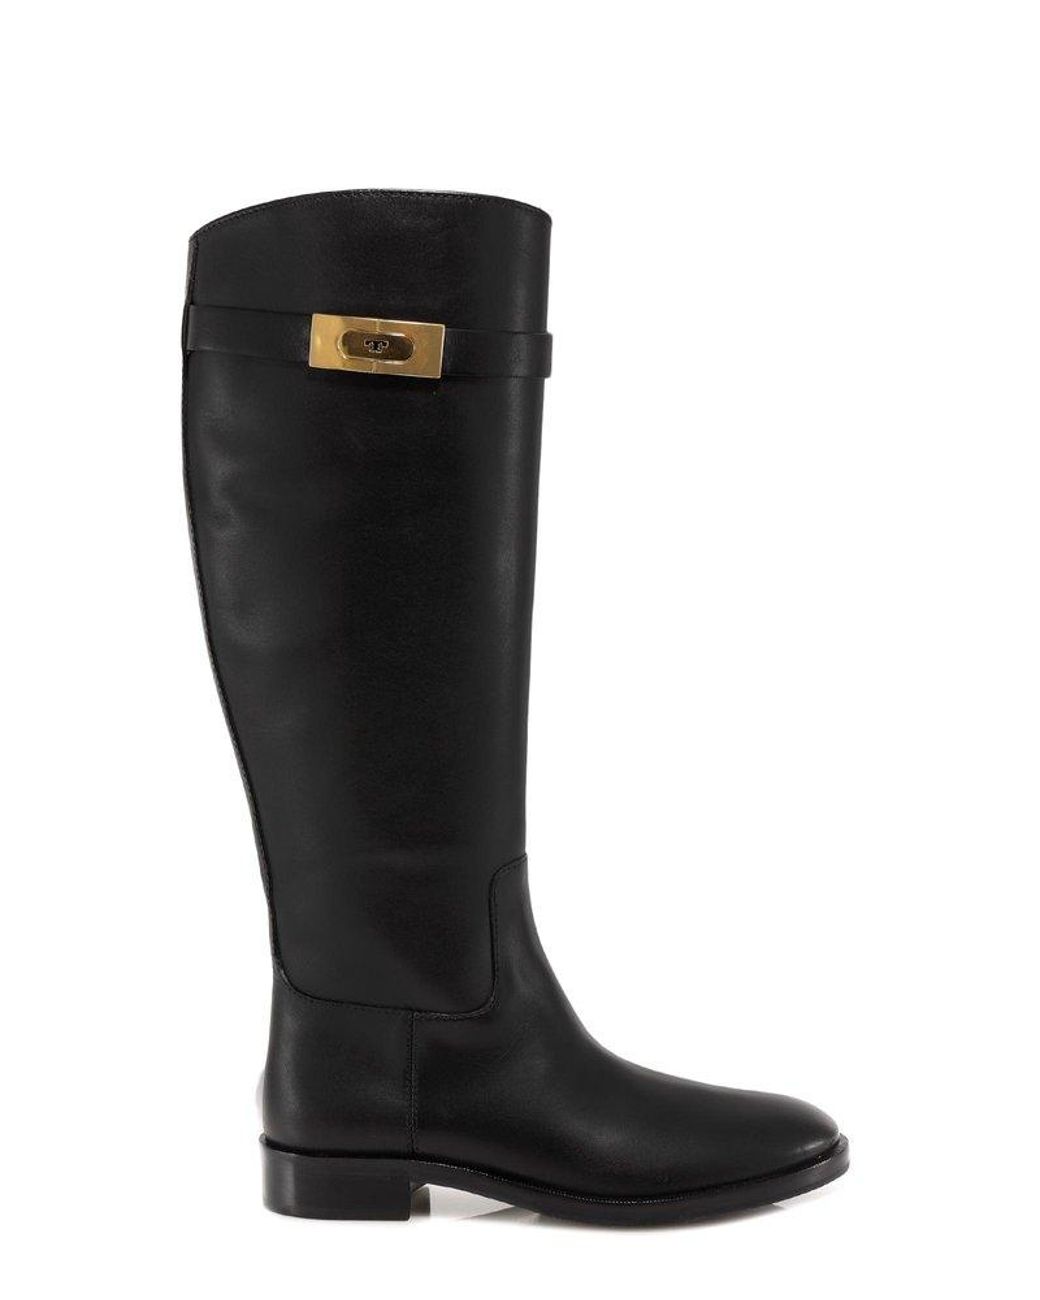 Tory Burch T-hardware Riding Boots in Black | Lyst